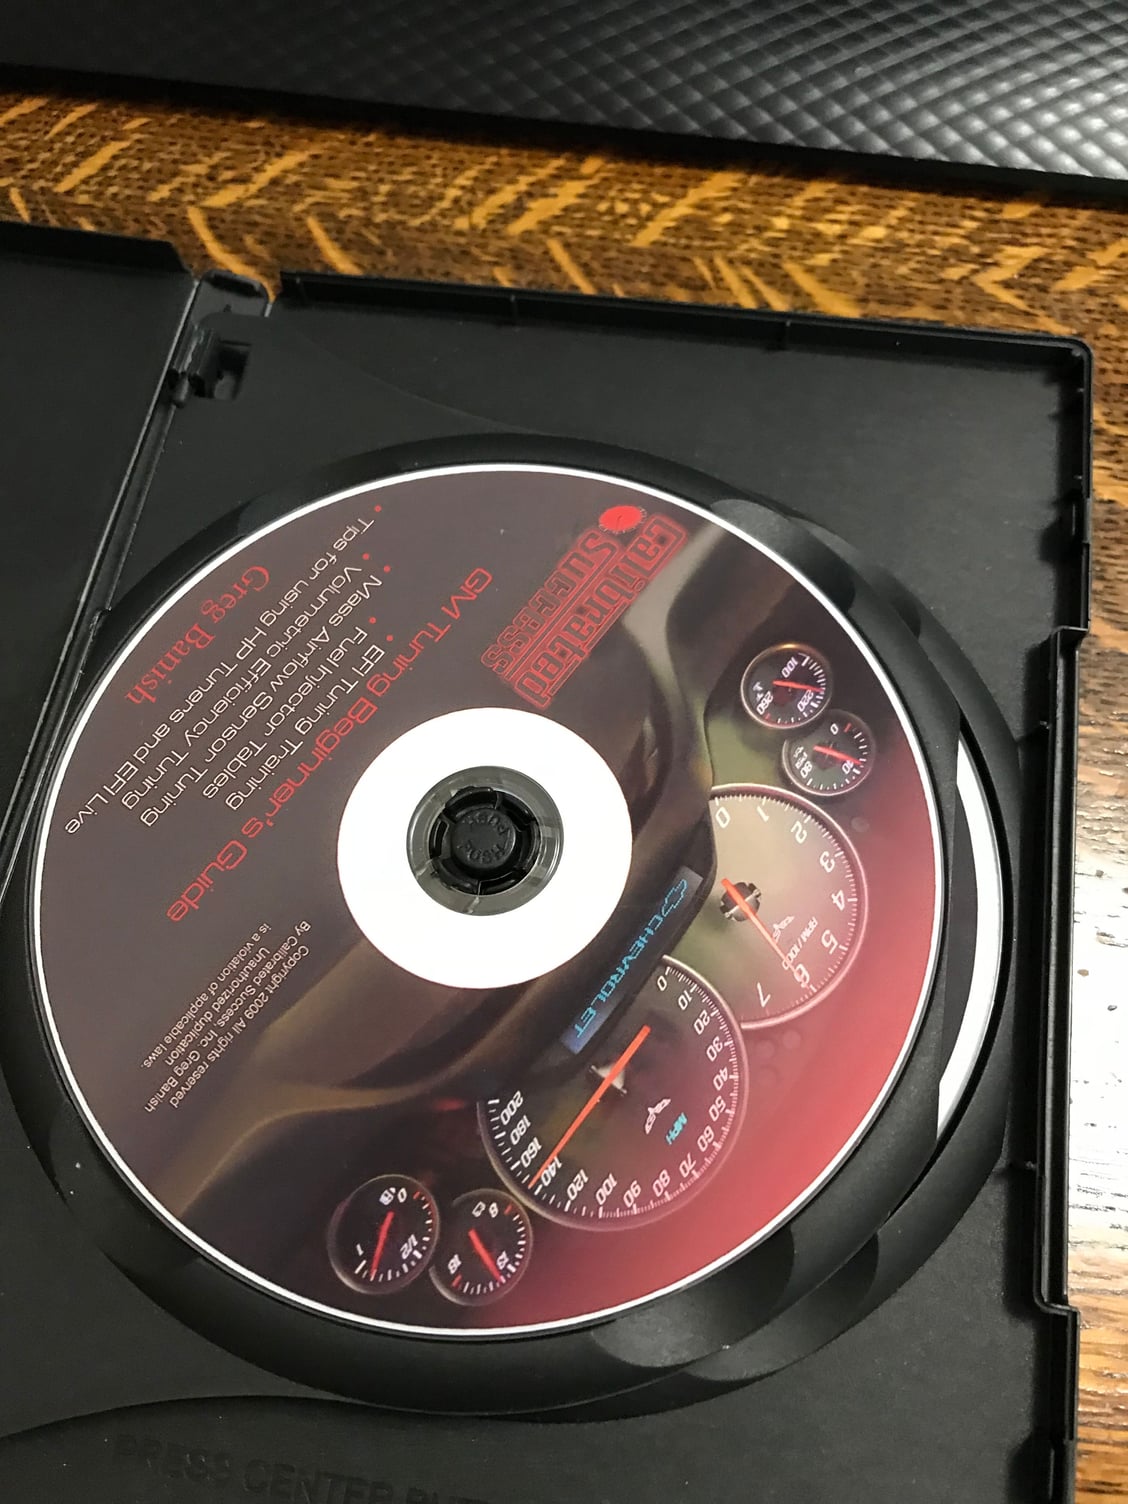  - *** SOLD *** Calibrated Success DVD - Greg Banish - 2 DVD set for GM. - Oakland, CA 94611, United States